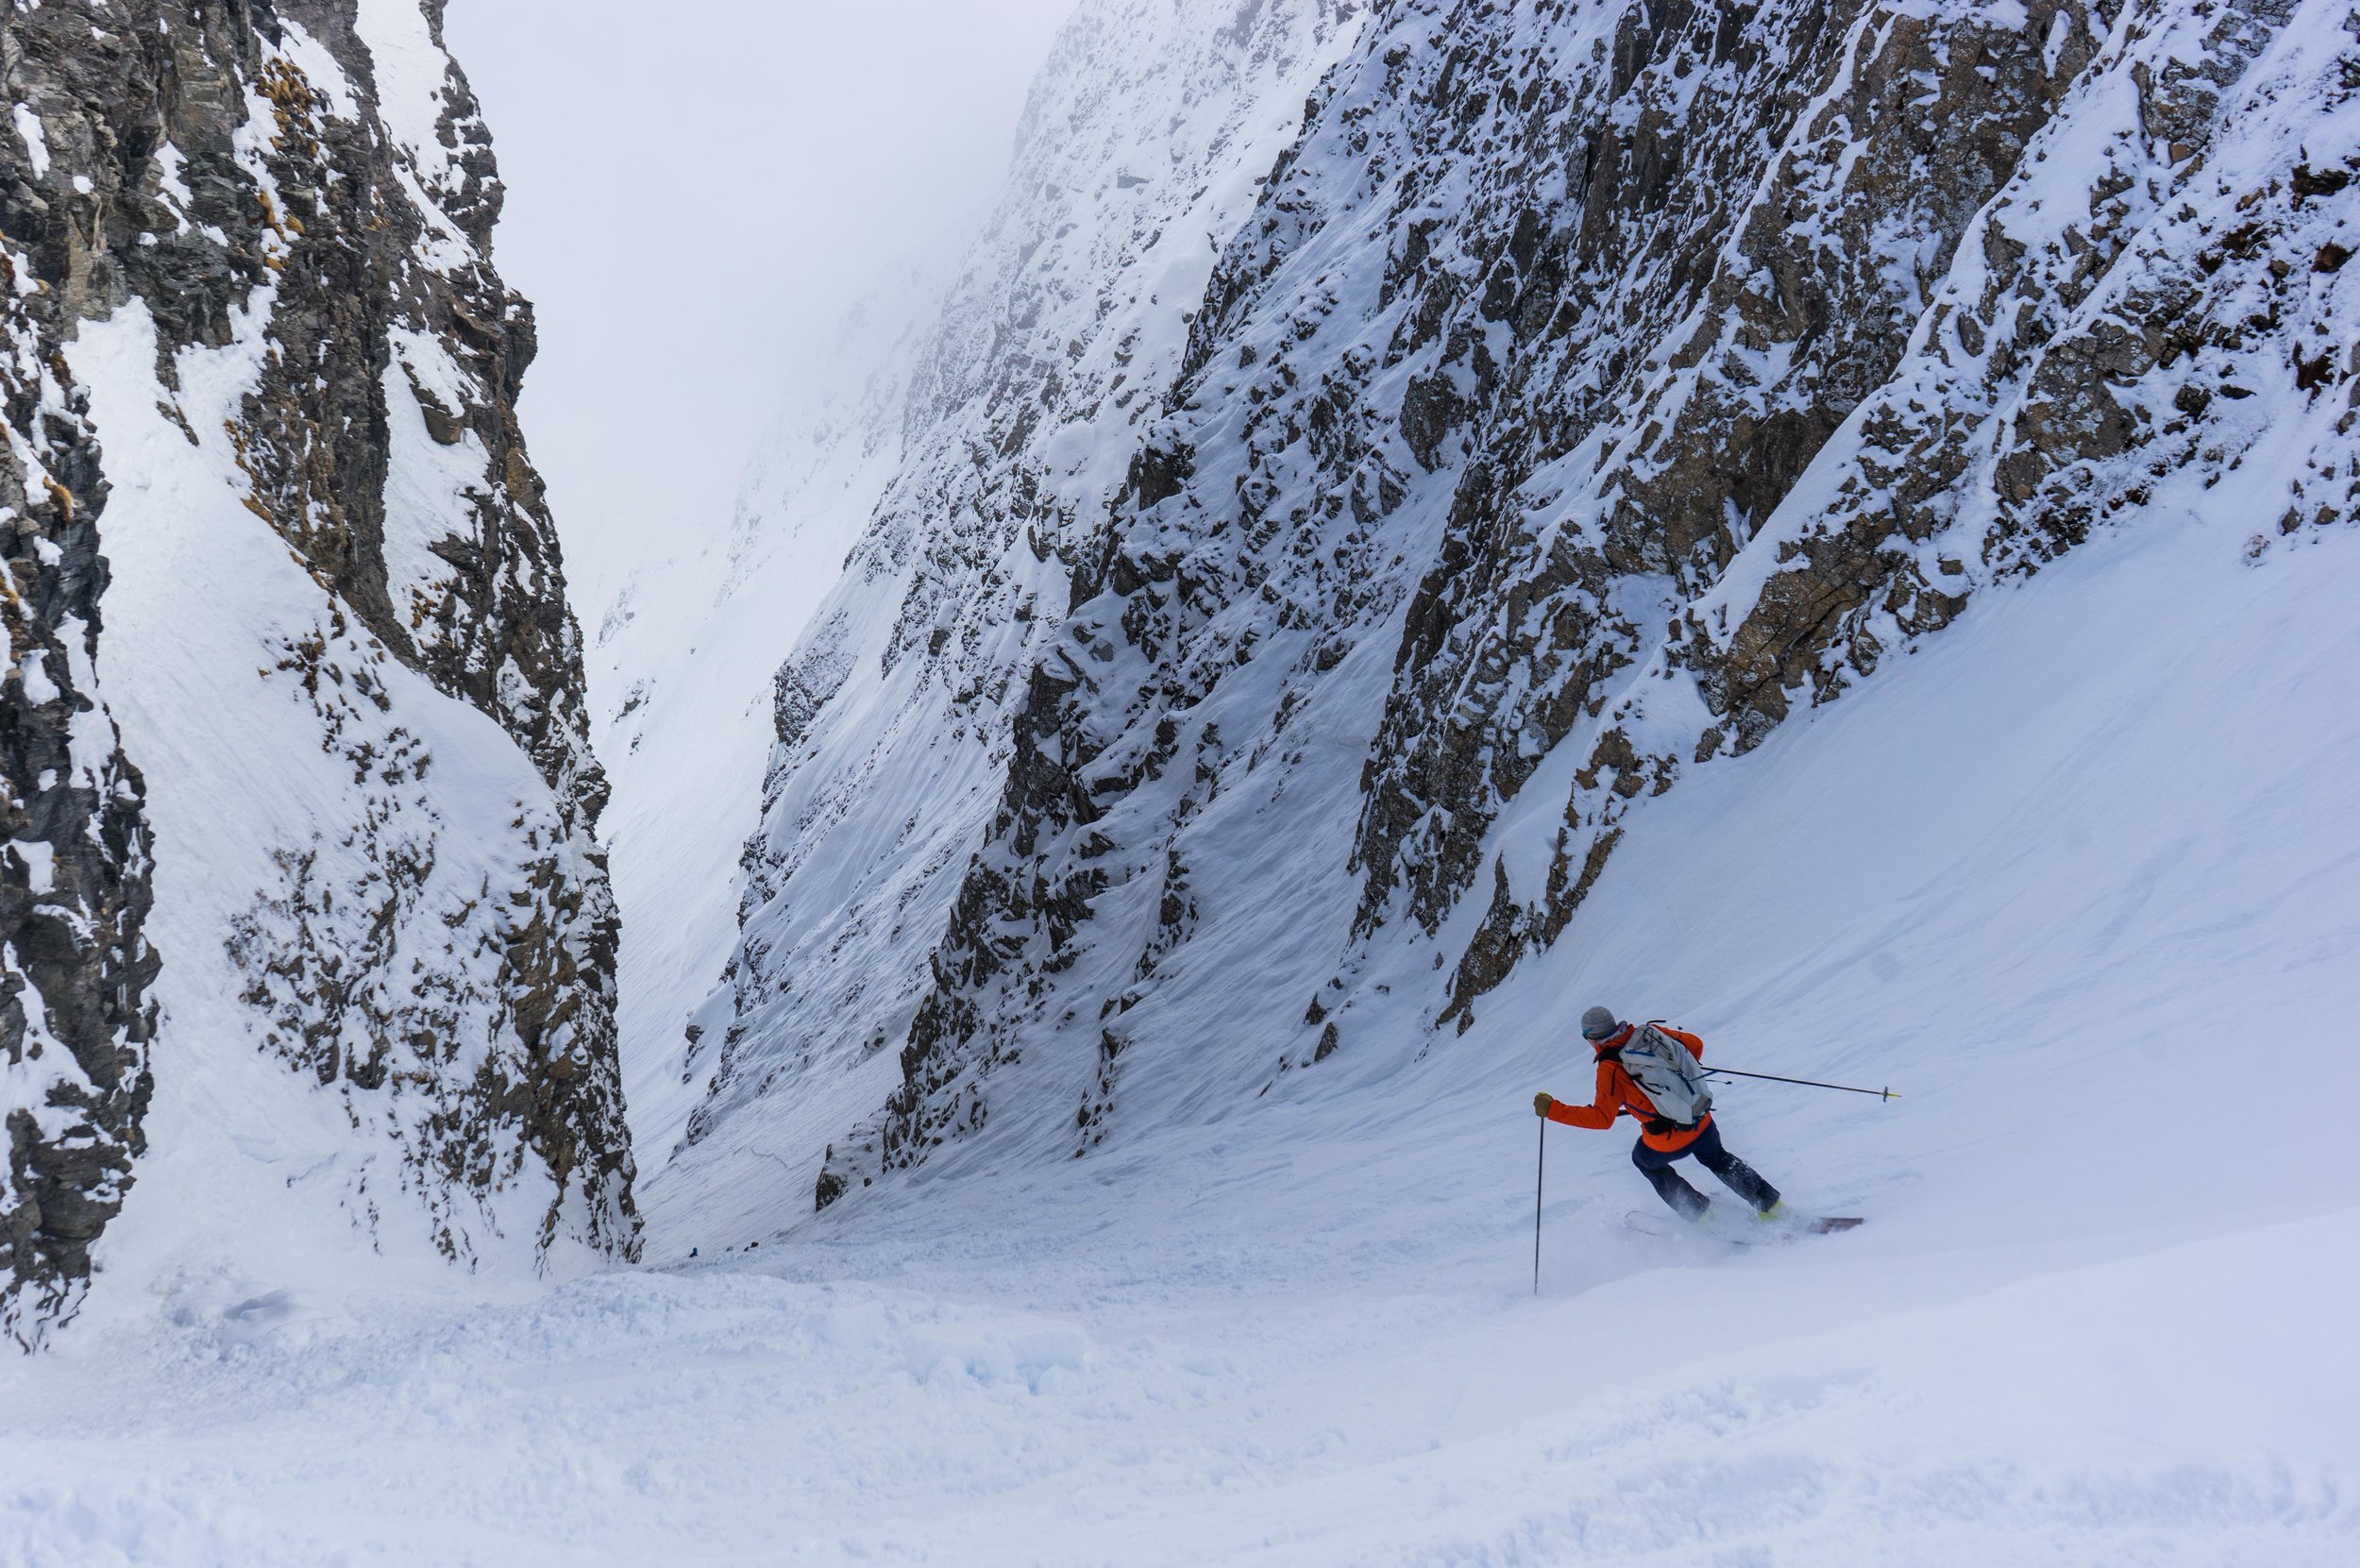 Couloir skiing in Alagna